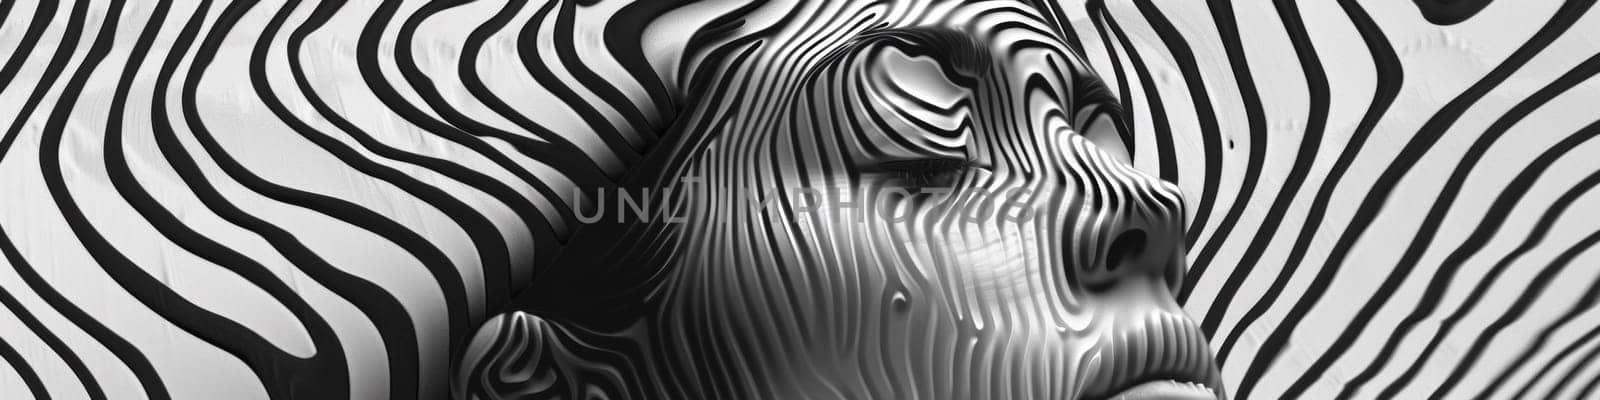 A woman's face is distorted by a zebra patterned background, AI by starush